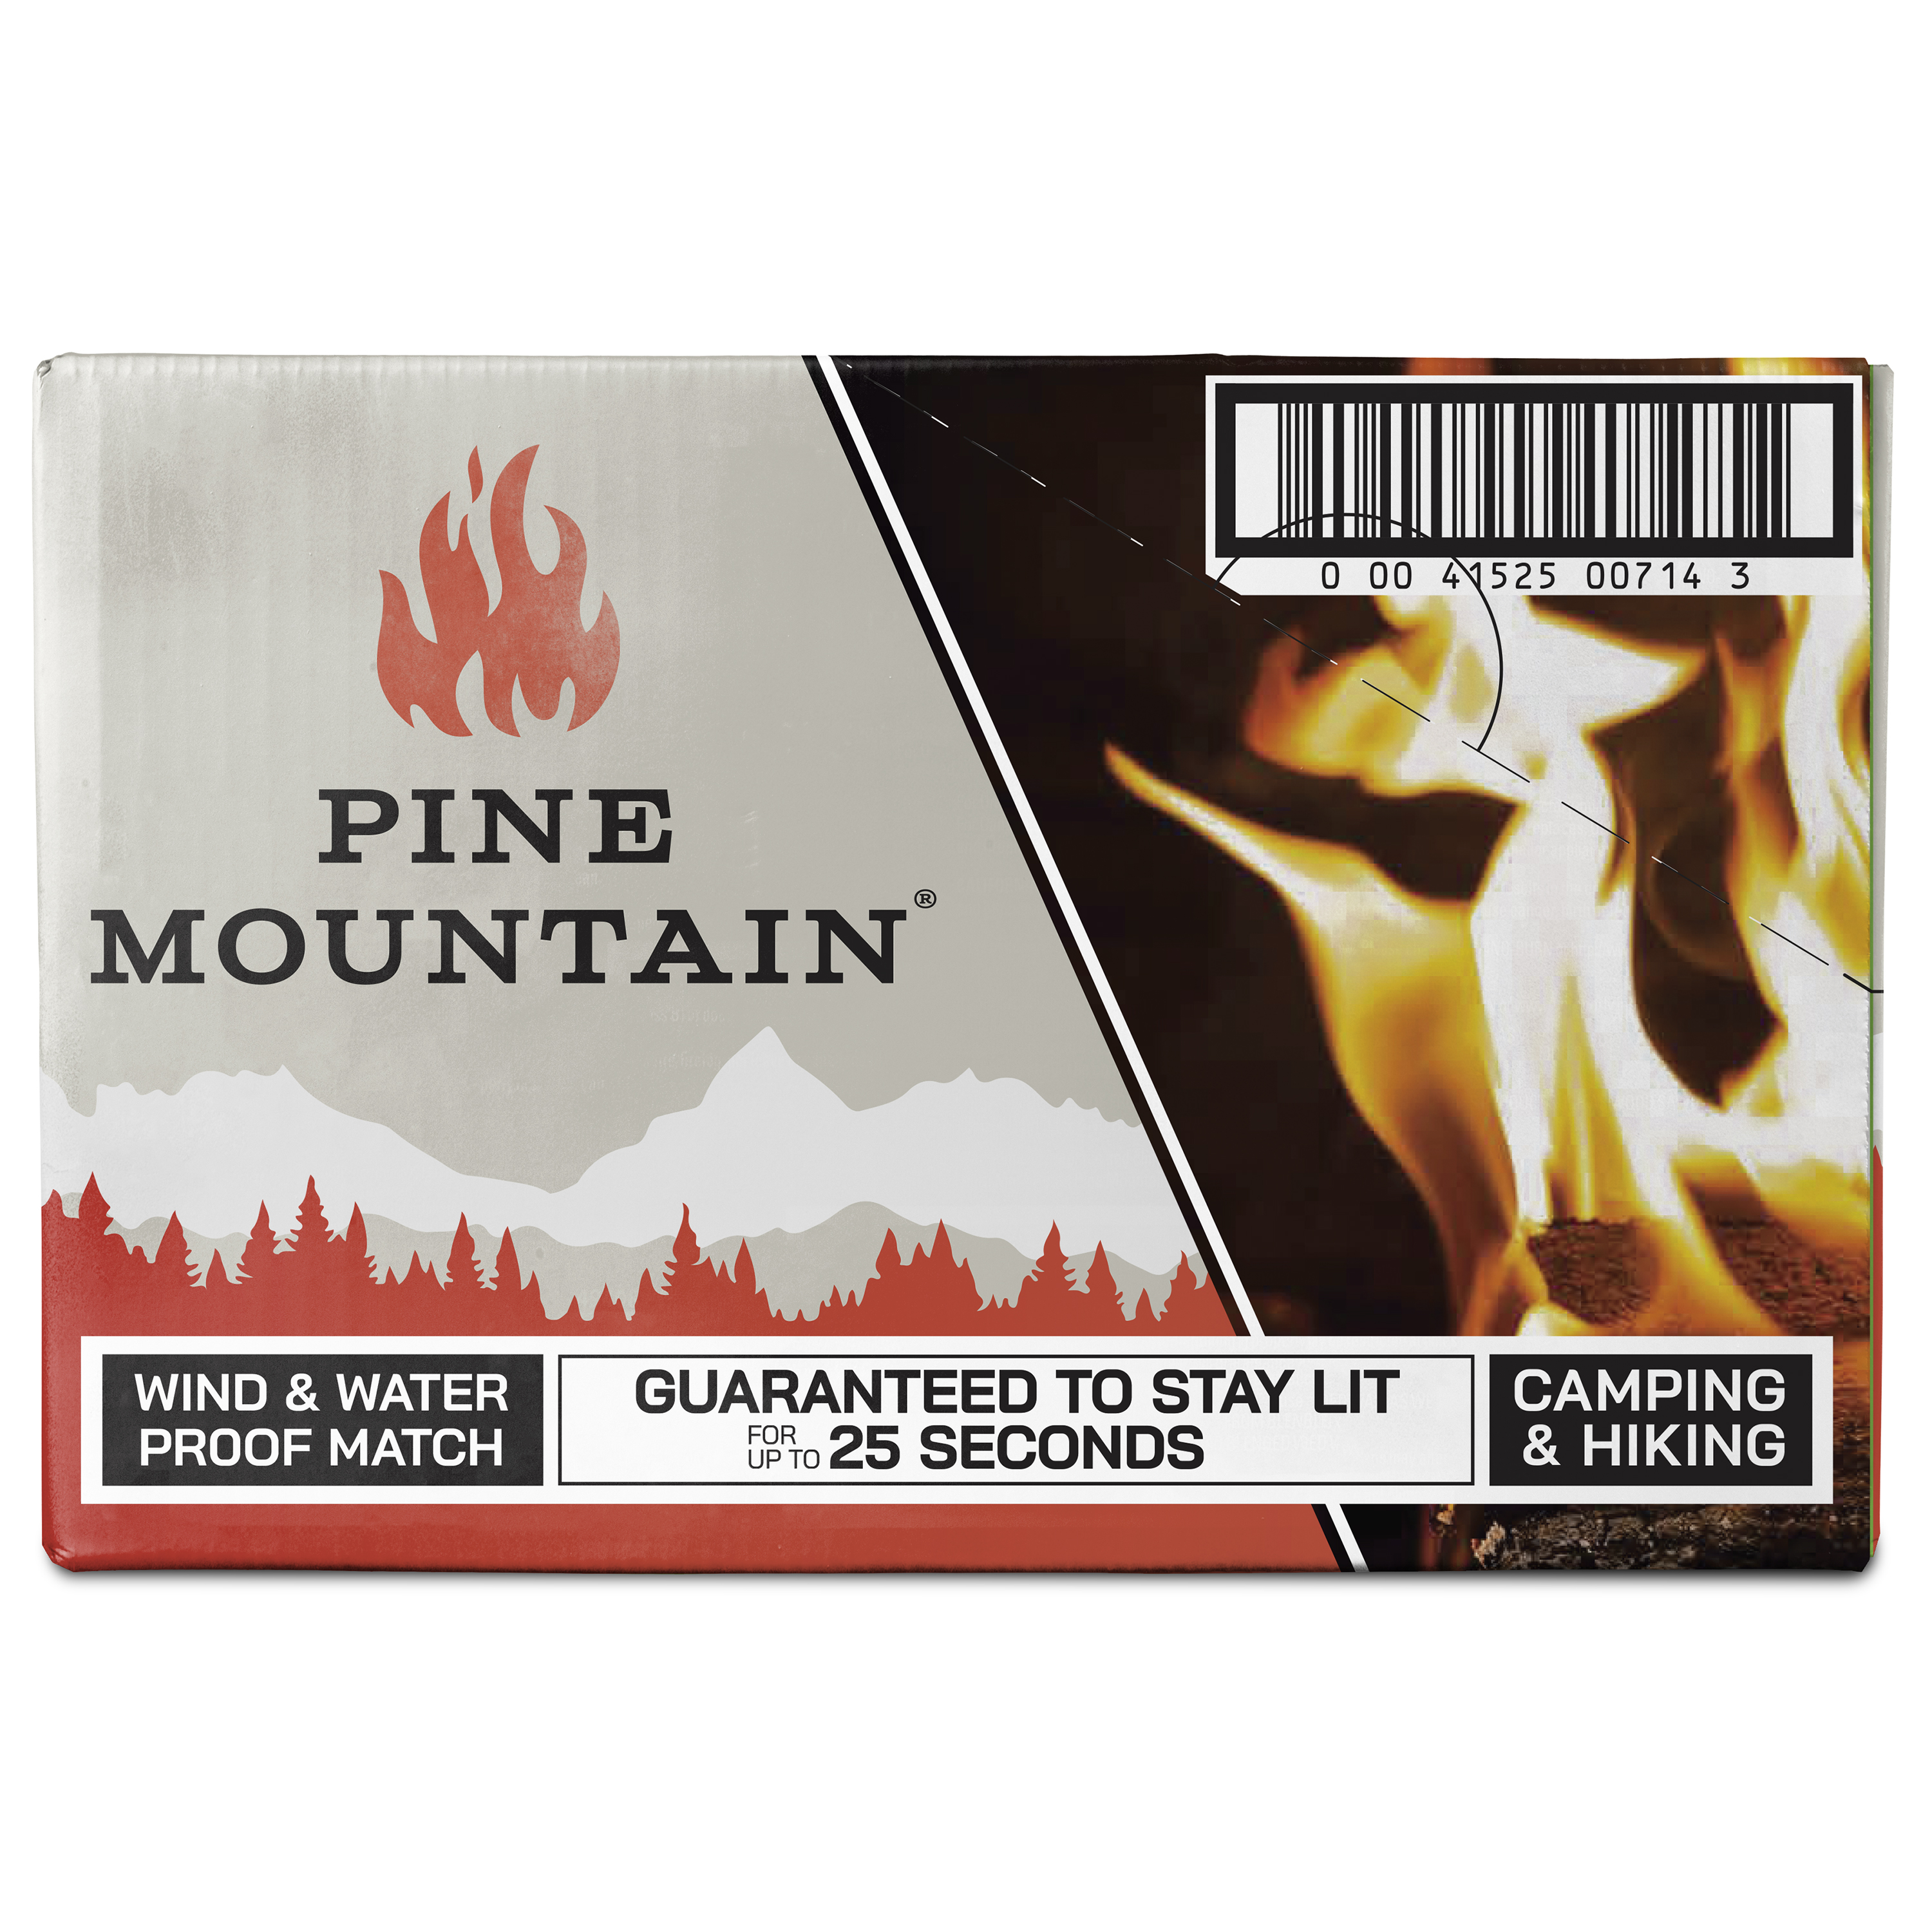 Pine Mountain Weatherproof Match, Match for Extreme Conditions, 25 Count, Tan and Red - image 3 of 5